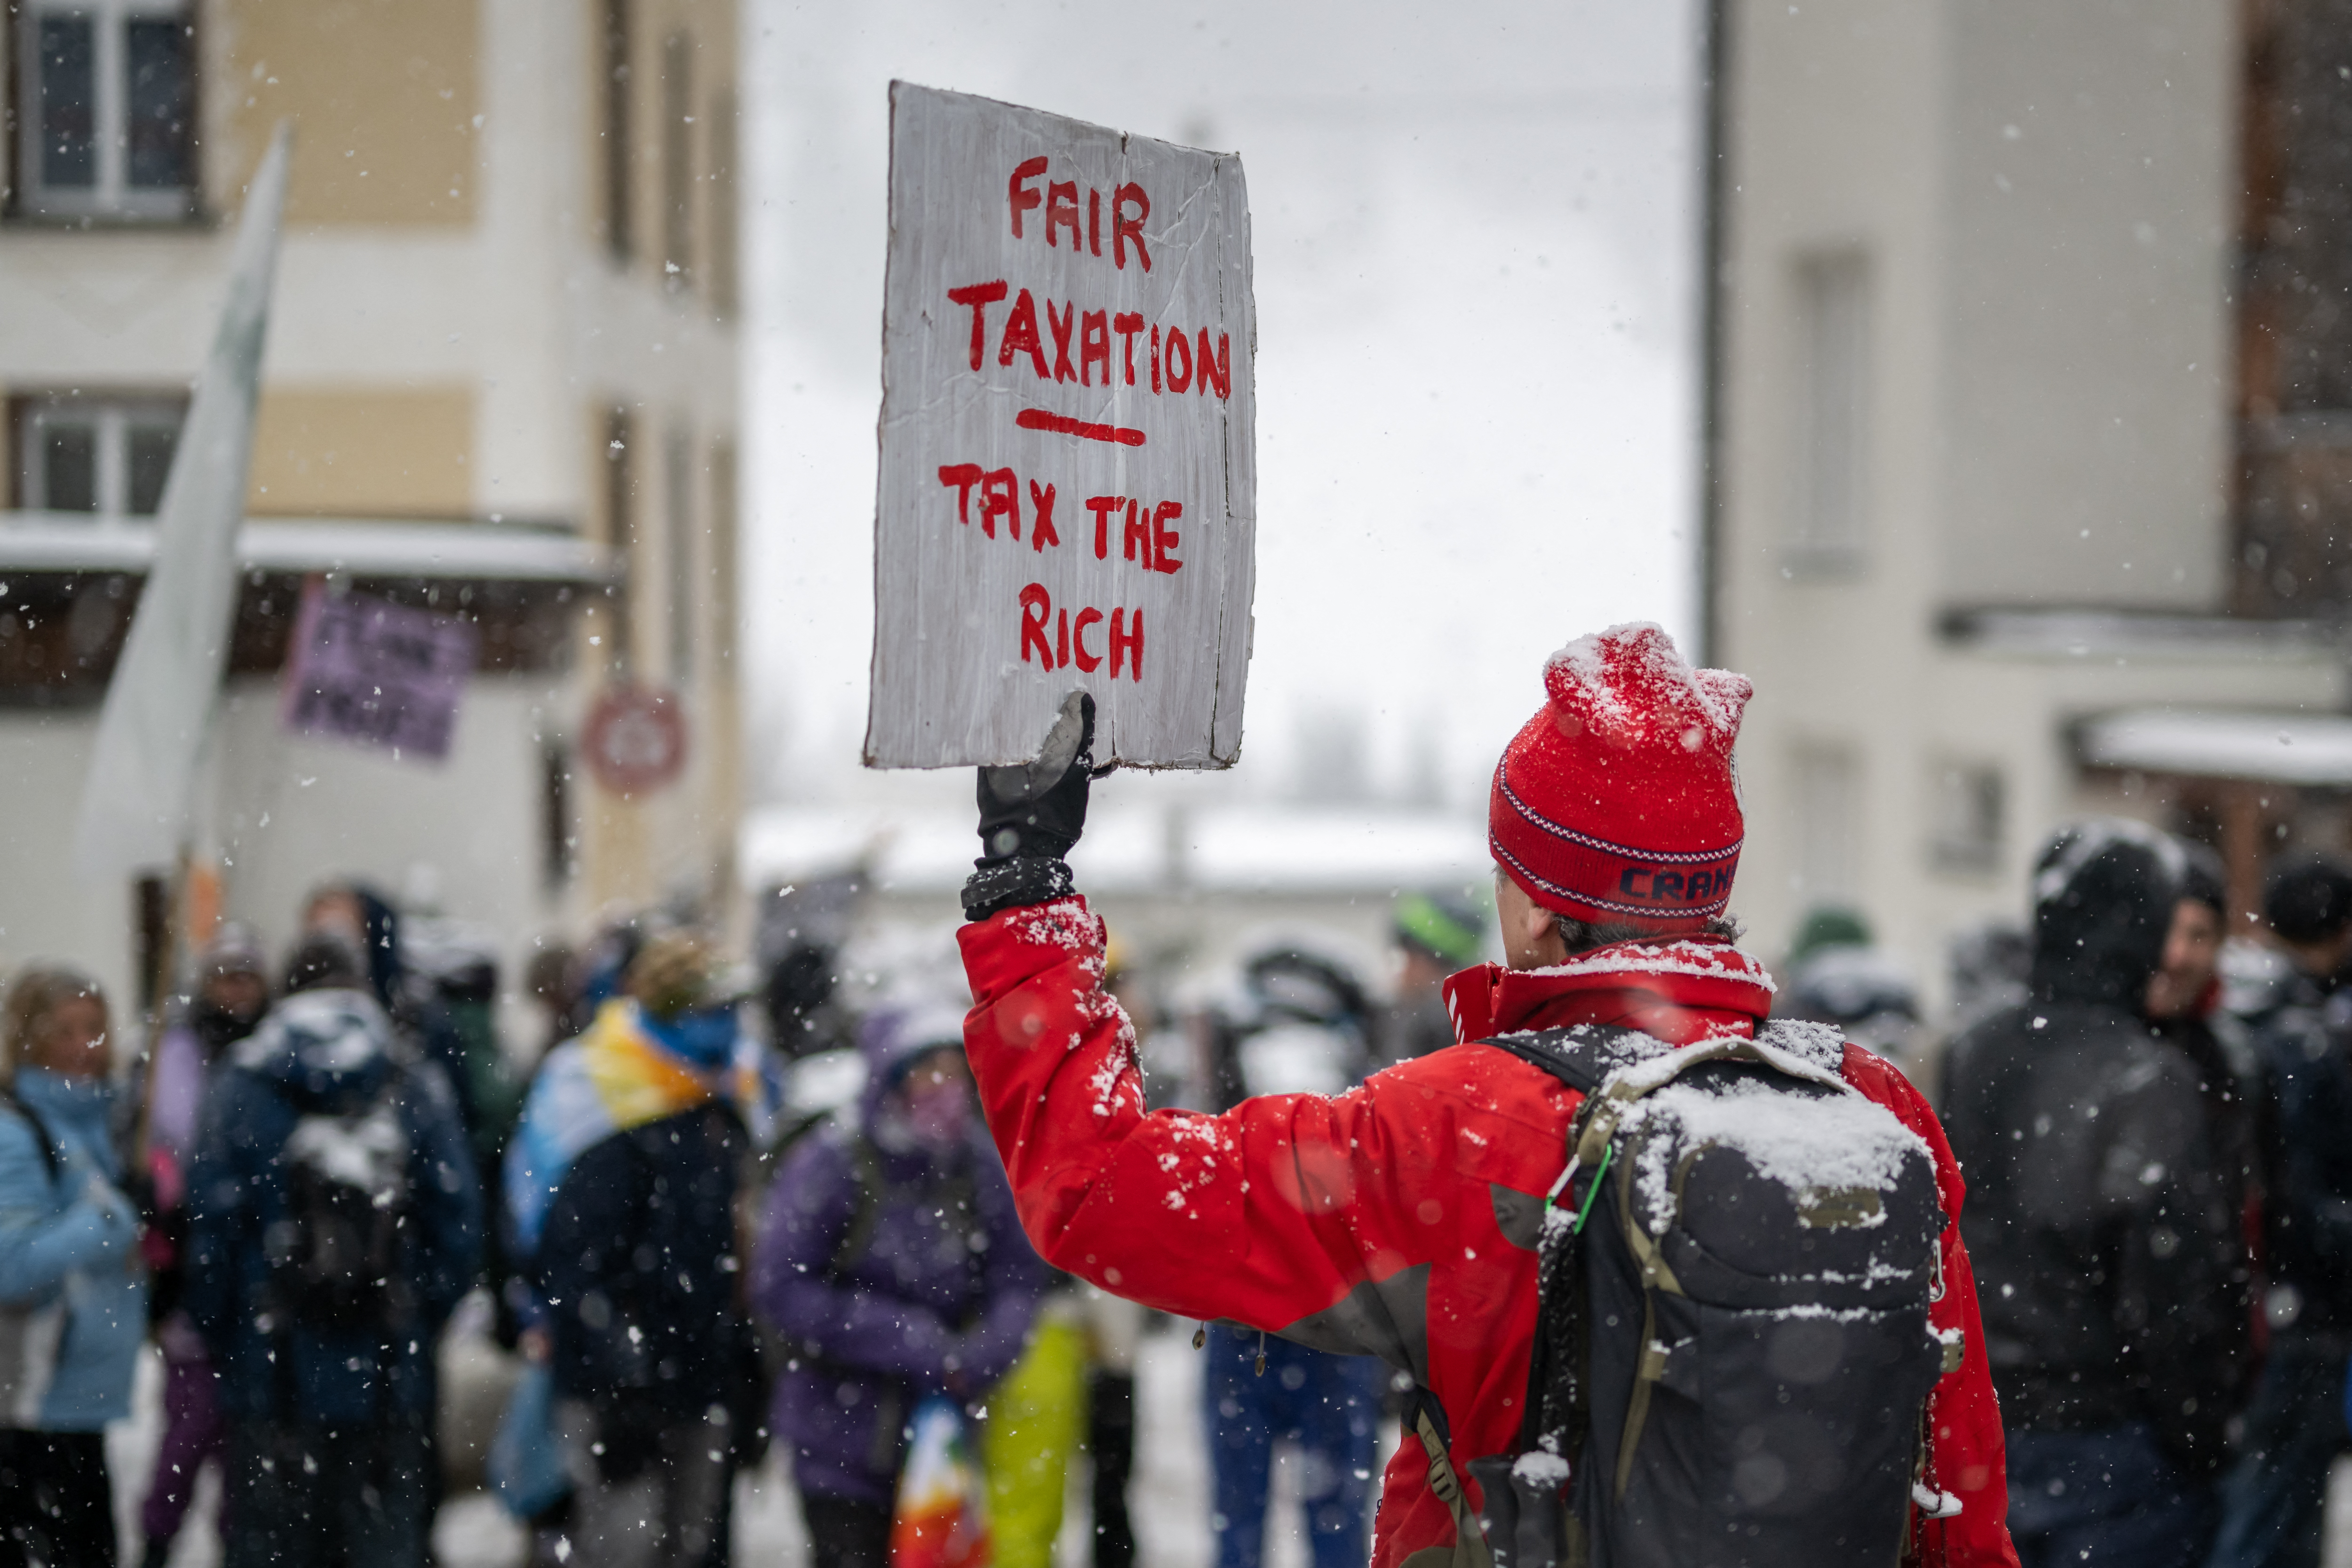 On the eve of Davos 2023, Young Socialists Switzerland activists call for a climate tax on the rich. /Fabrice Coffrini/AFP